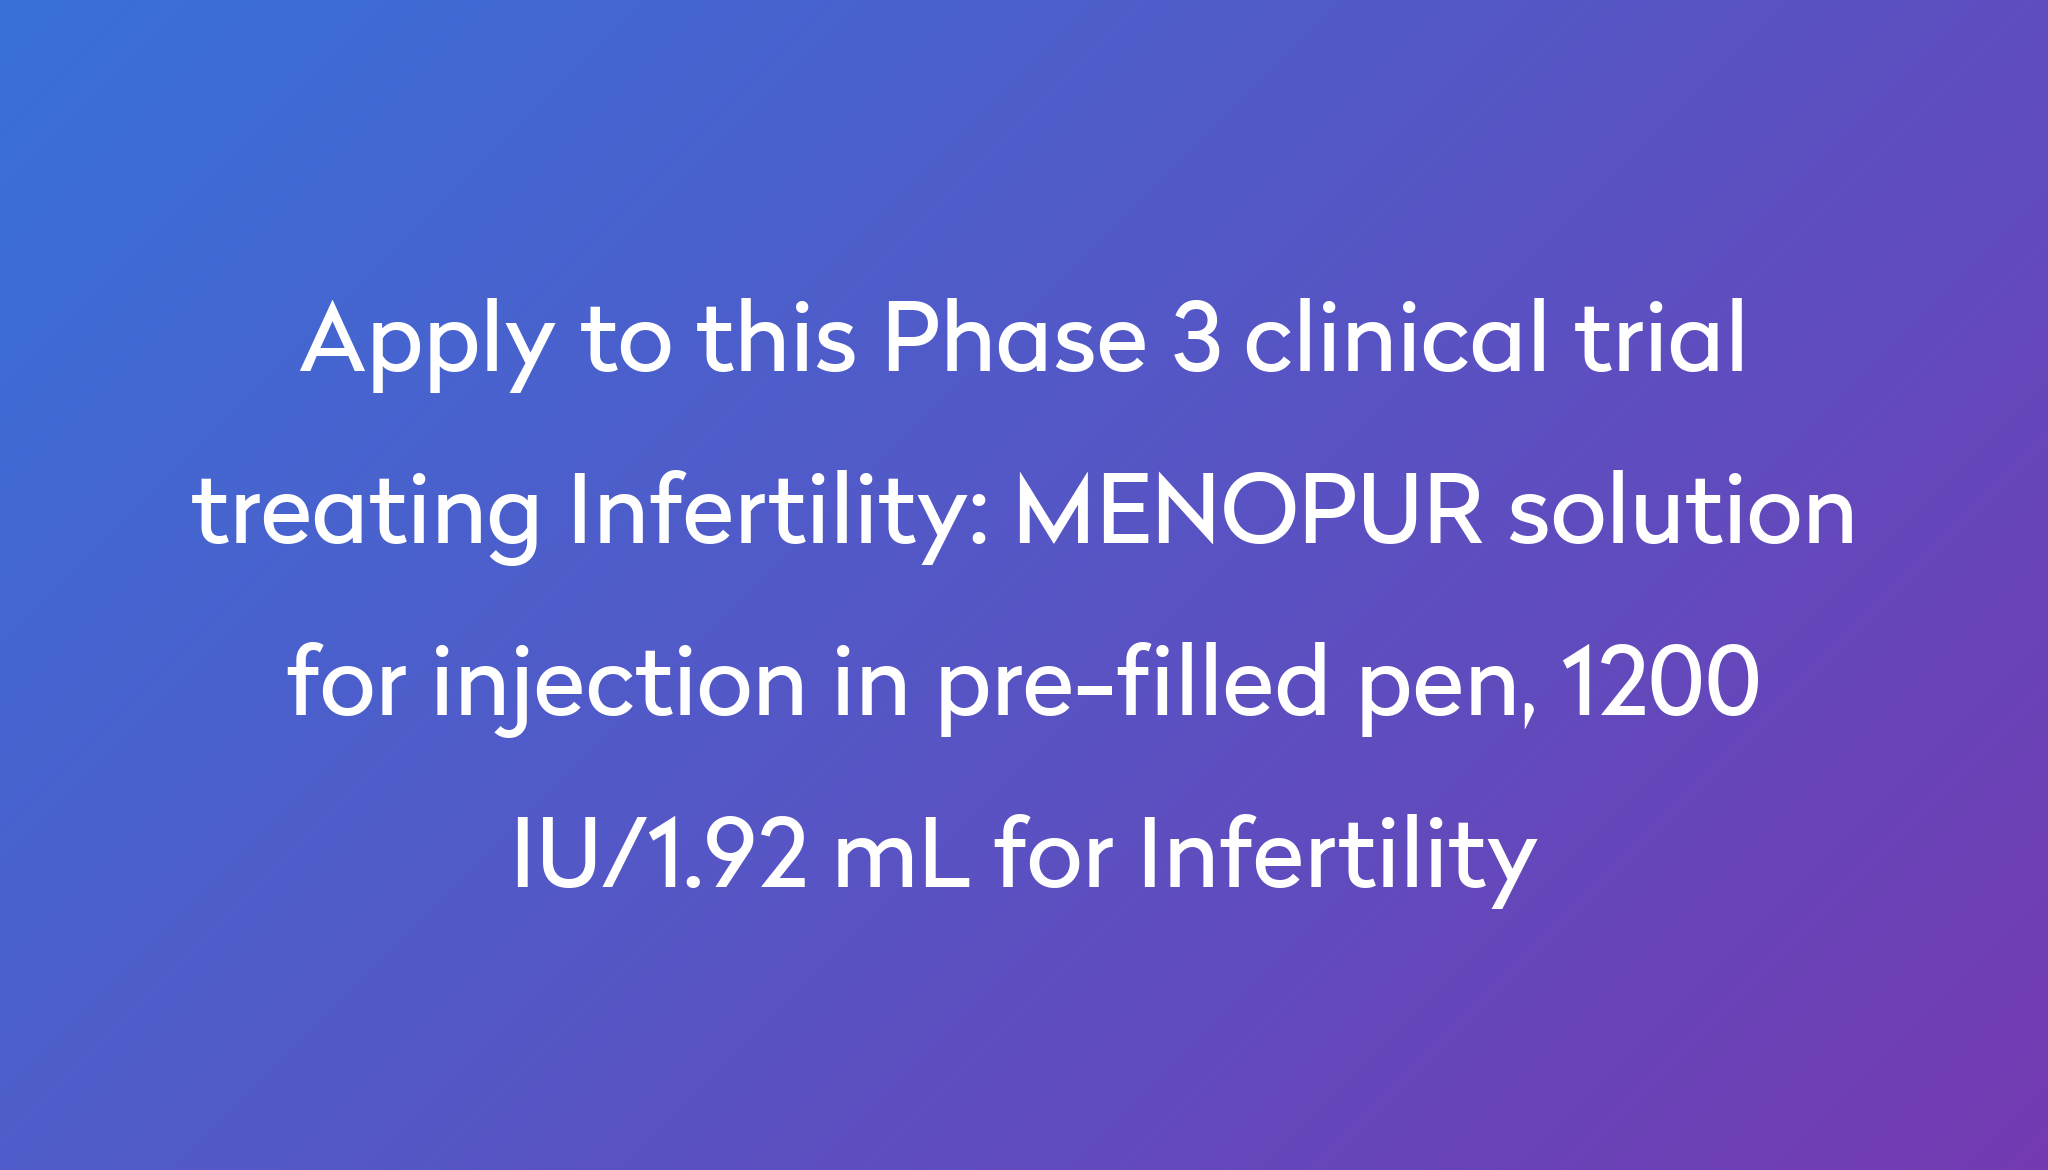 menopur-solution-for-injection-in-pre-filled-pen-1200-iu-1-92-ml-for